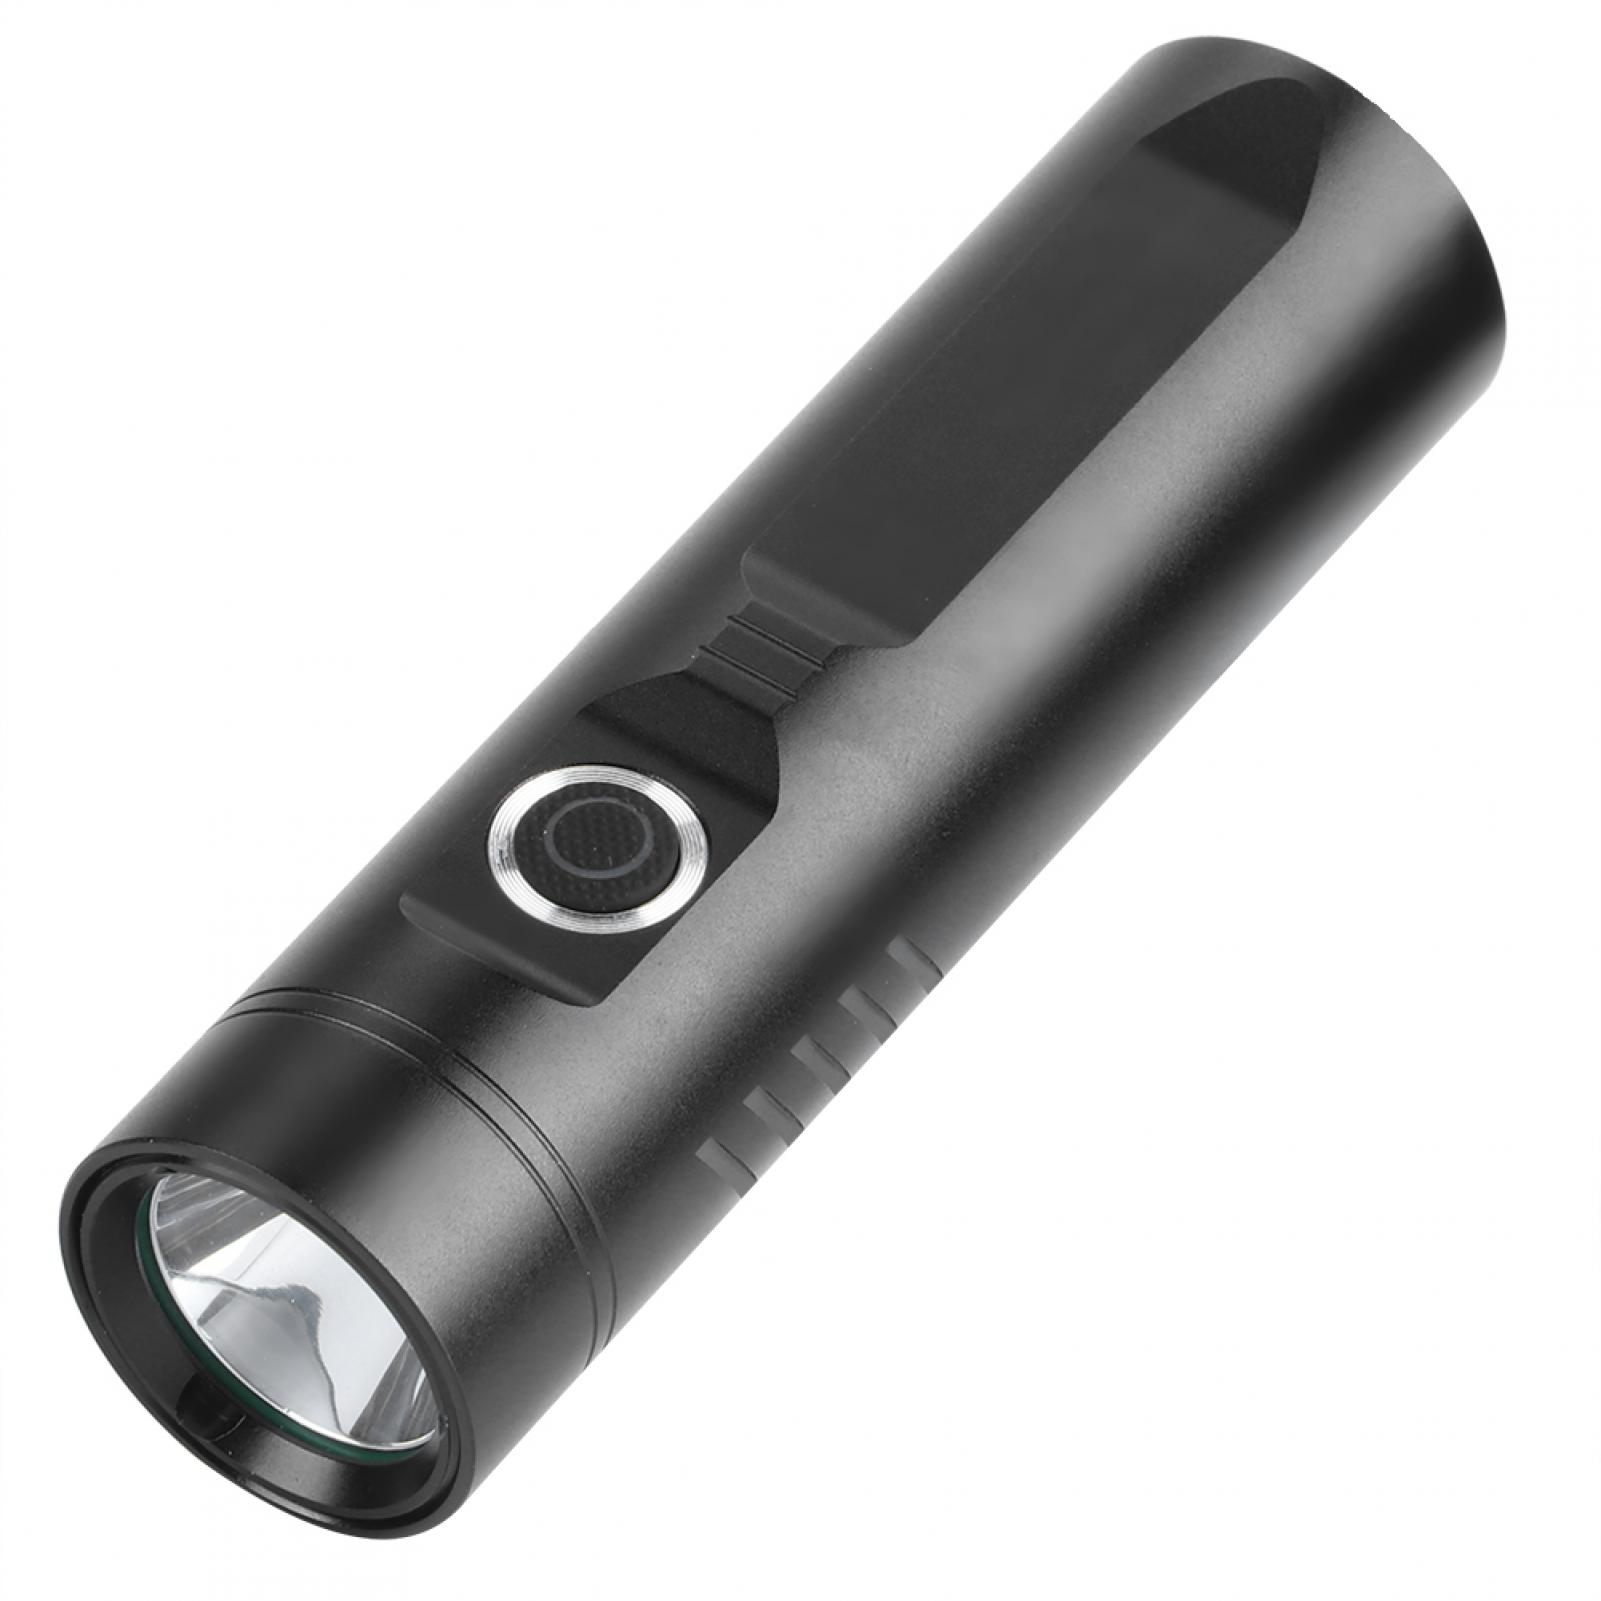 Details about  / Powerful 3200mAh For Bicycle Light Torch USB Rechargeable Battery Flashlight New